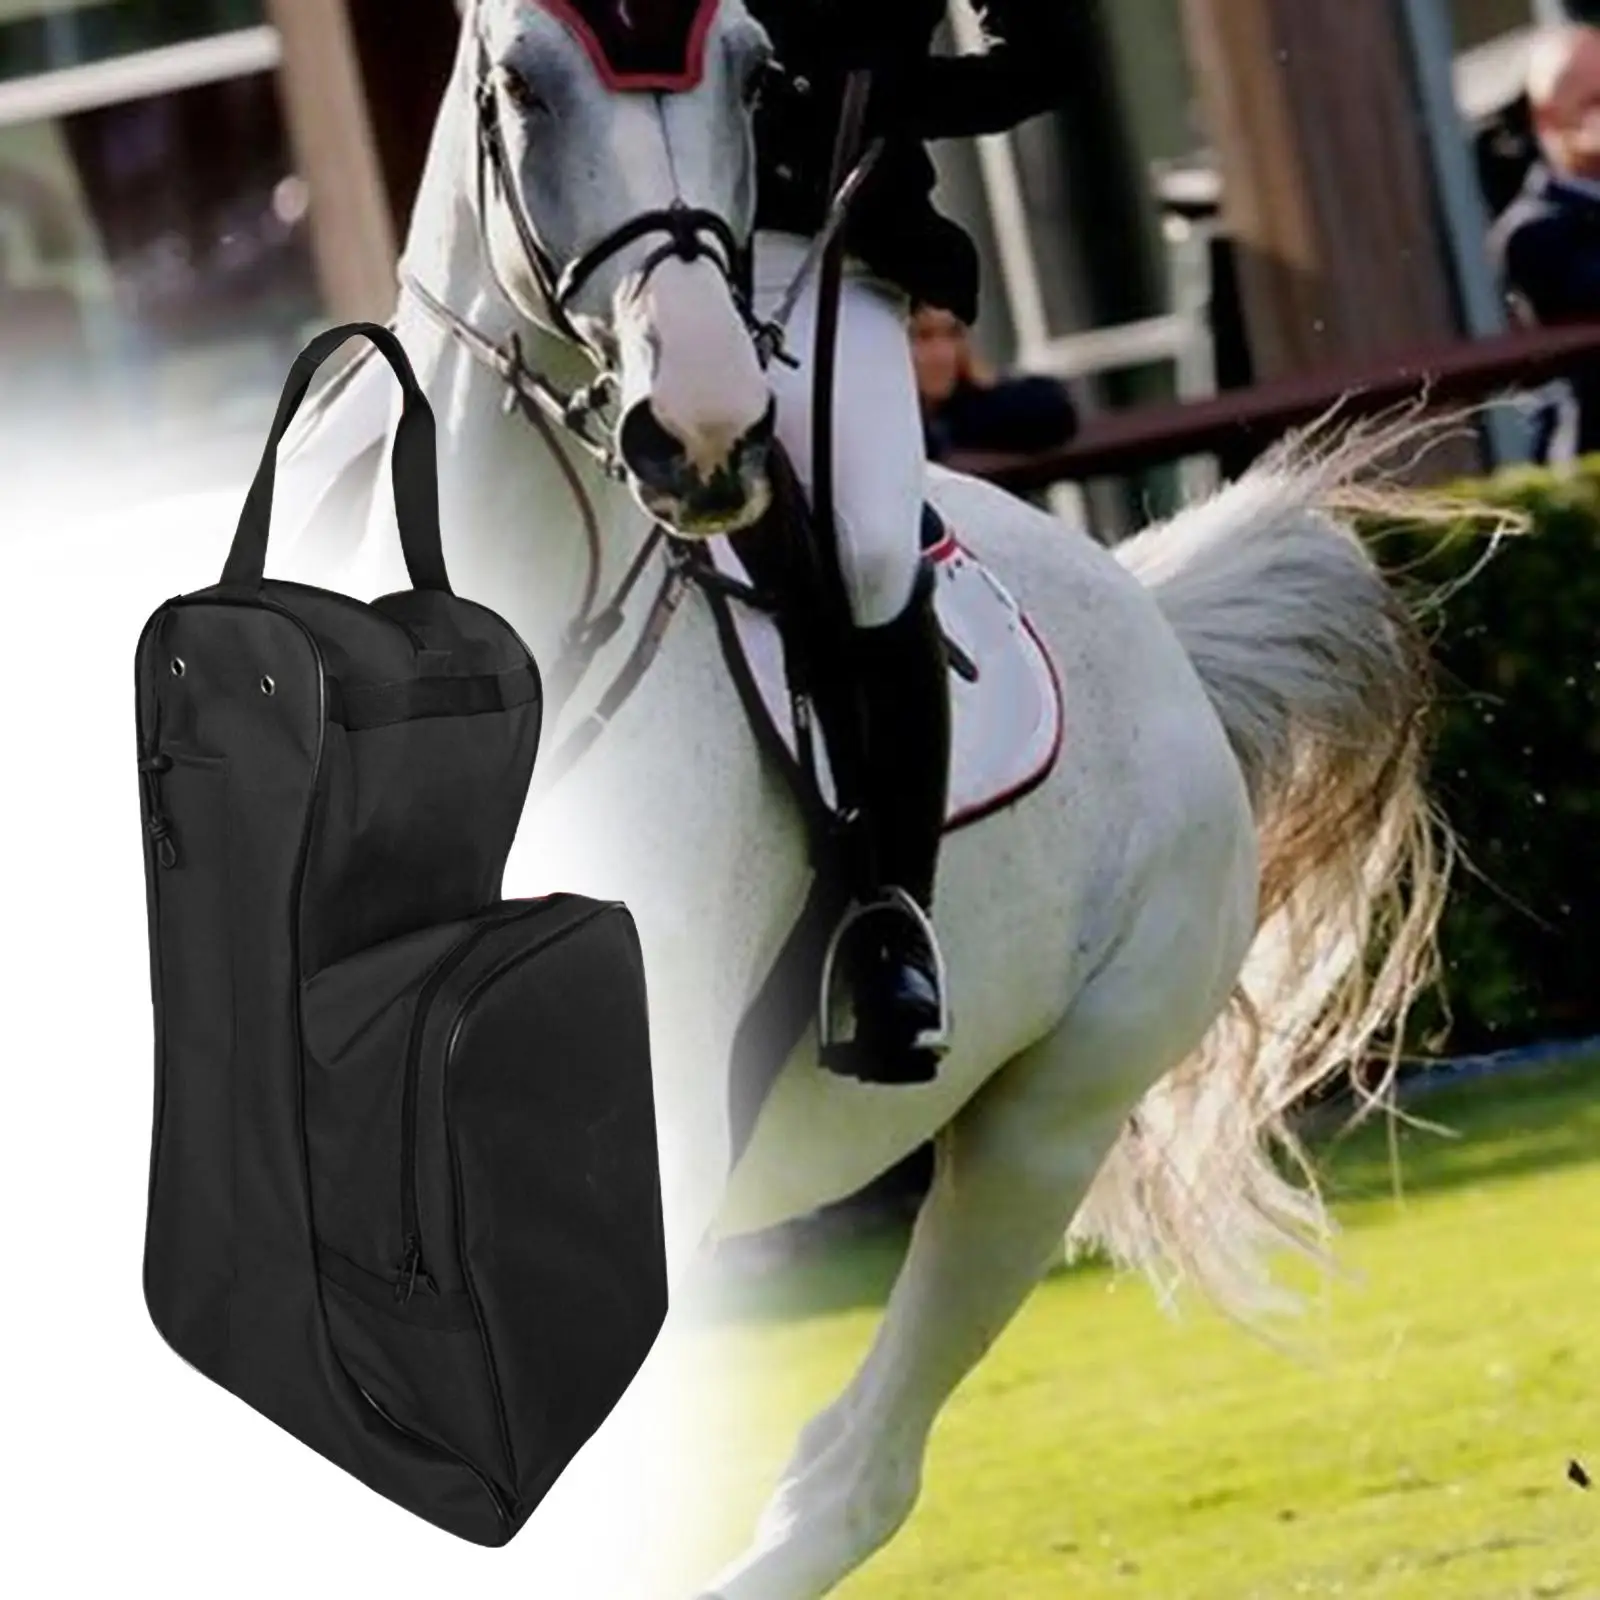 Equestrian Bag Boots Carry Bag Sturdy Lightweight Convenient with Pocket Waterproof for Travel Long Boots Sports